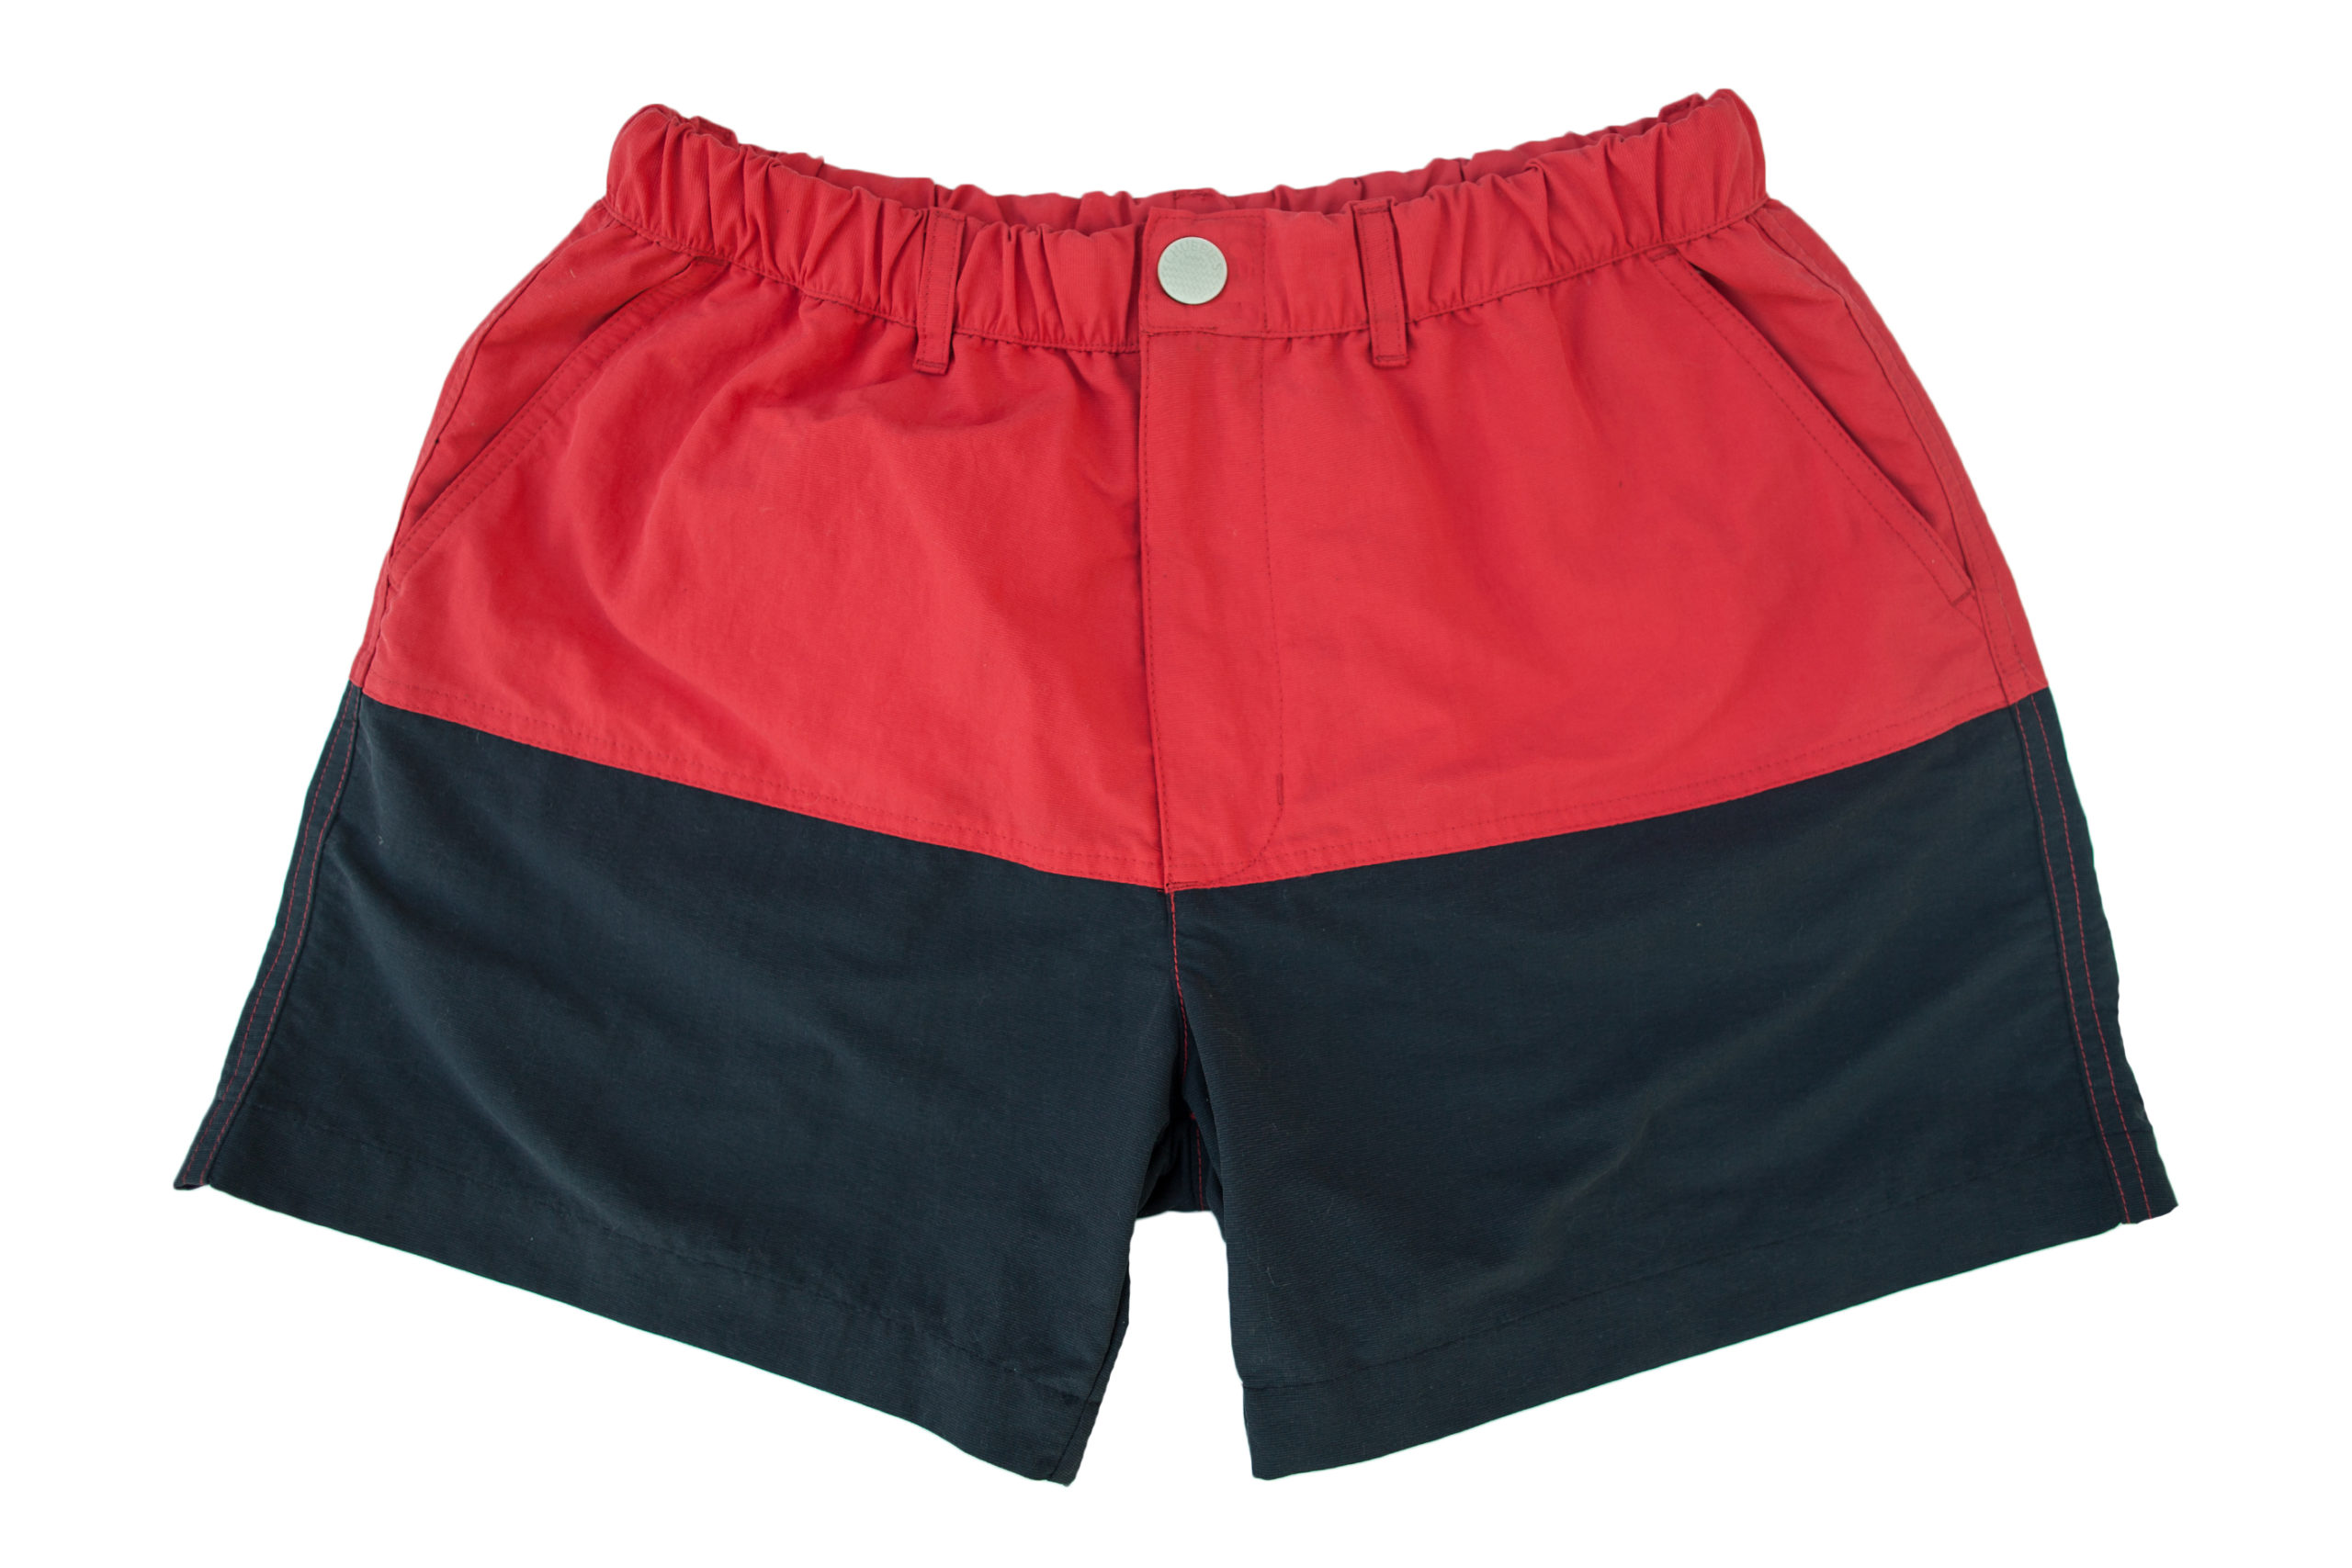 Chubbies Shorts is on a mission to own the men’s shorts market and ...